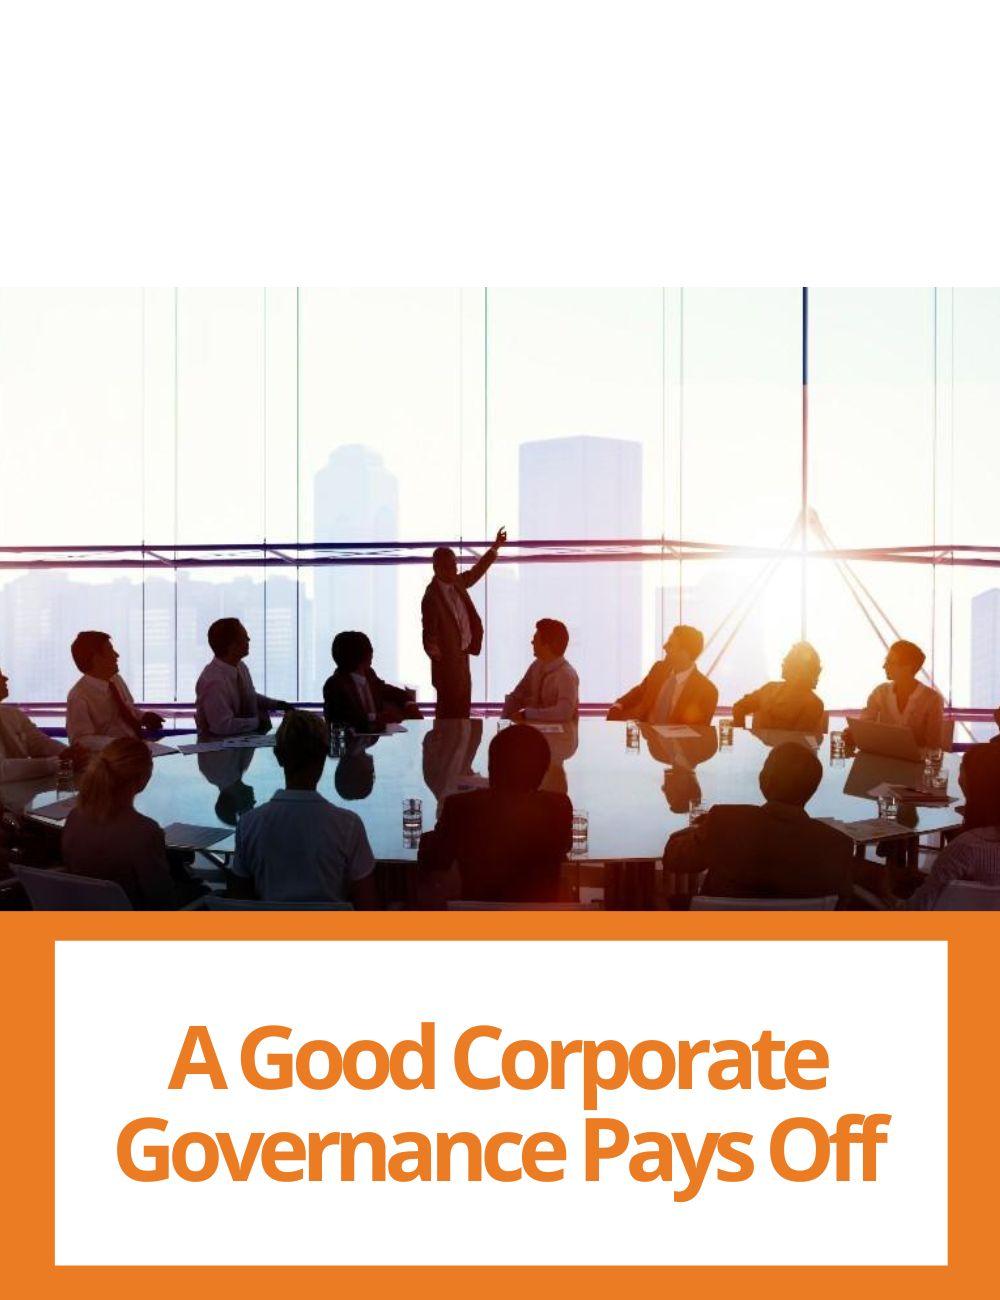 Link to related stories. Image: a group of people in meeting. Story headline: A Good Corporate Governance Pays Off